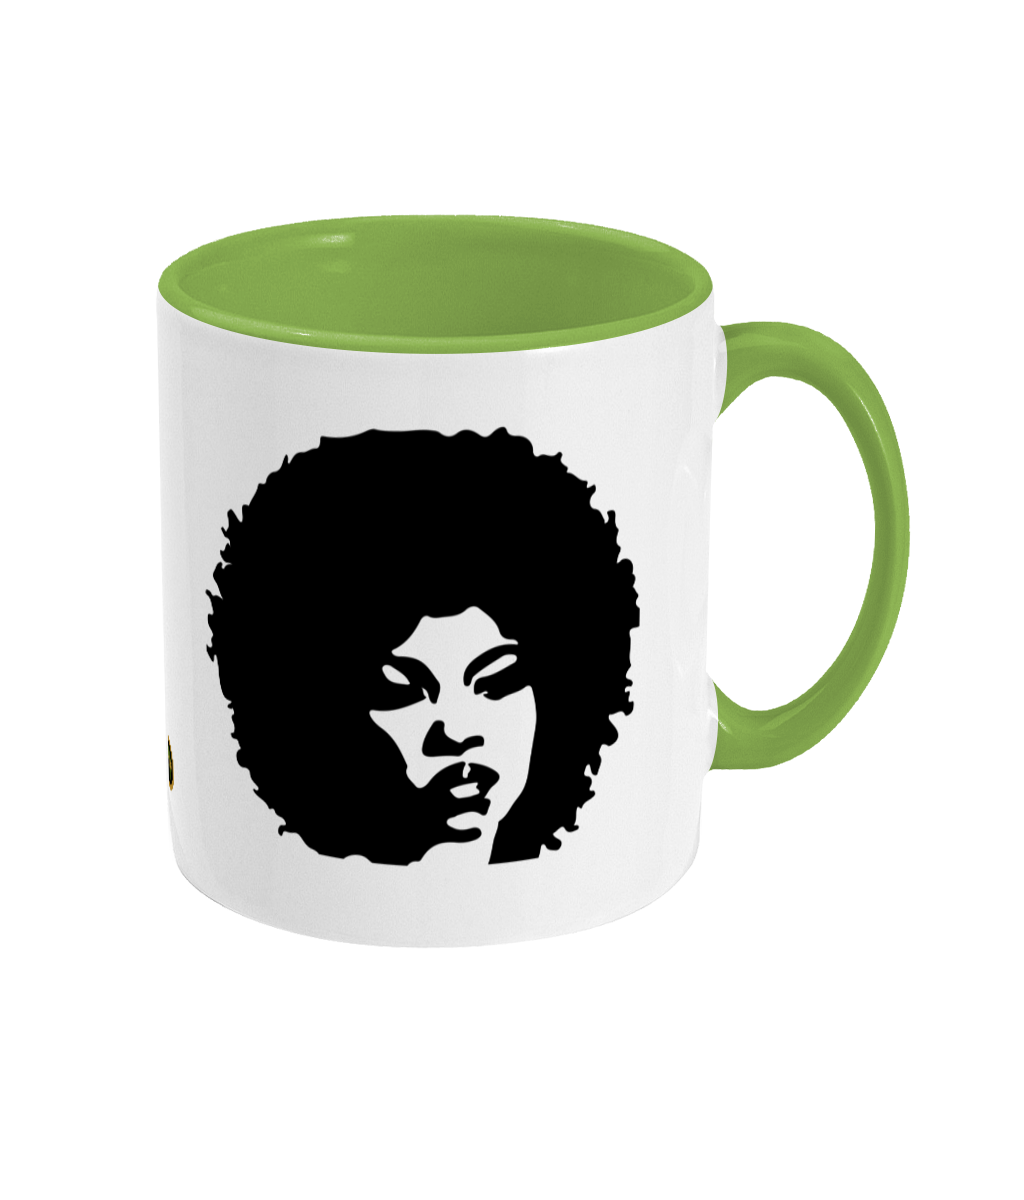 Coloured Cup | Motivational | Black Queen